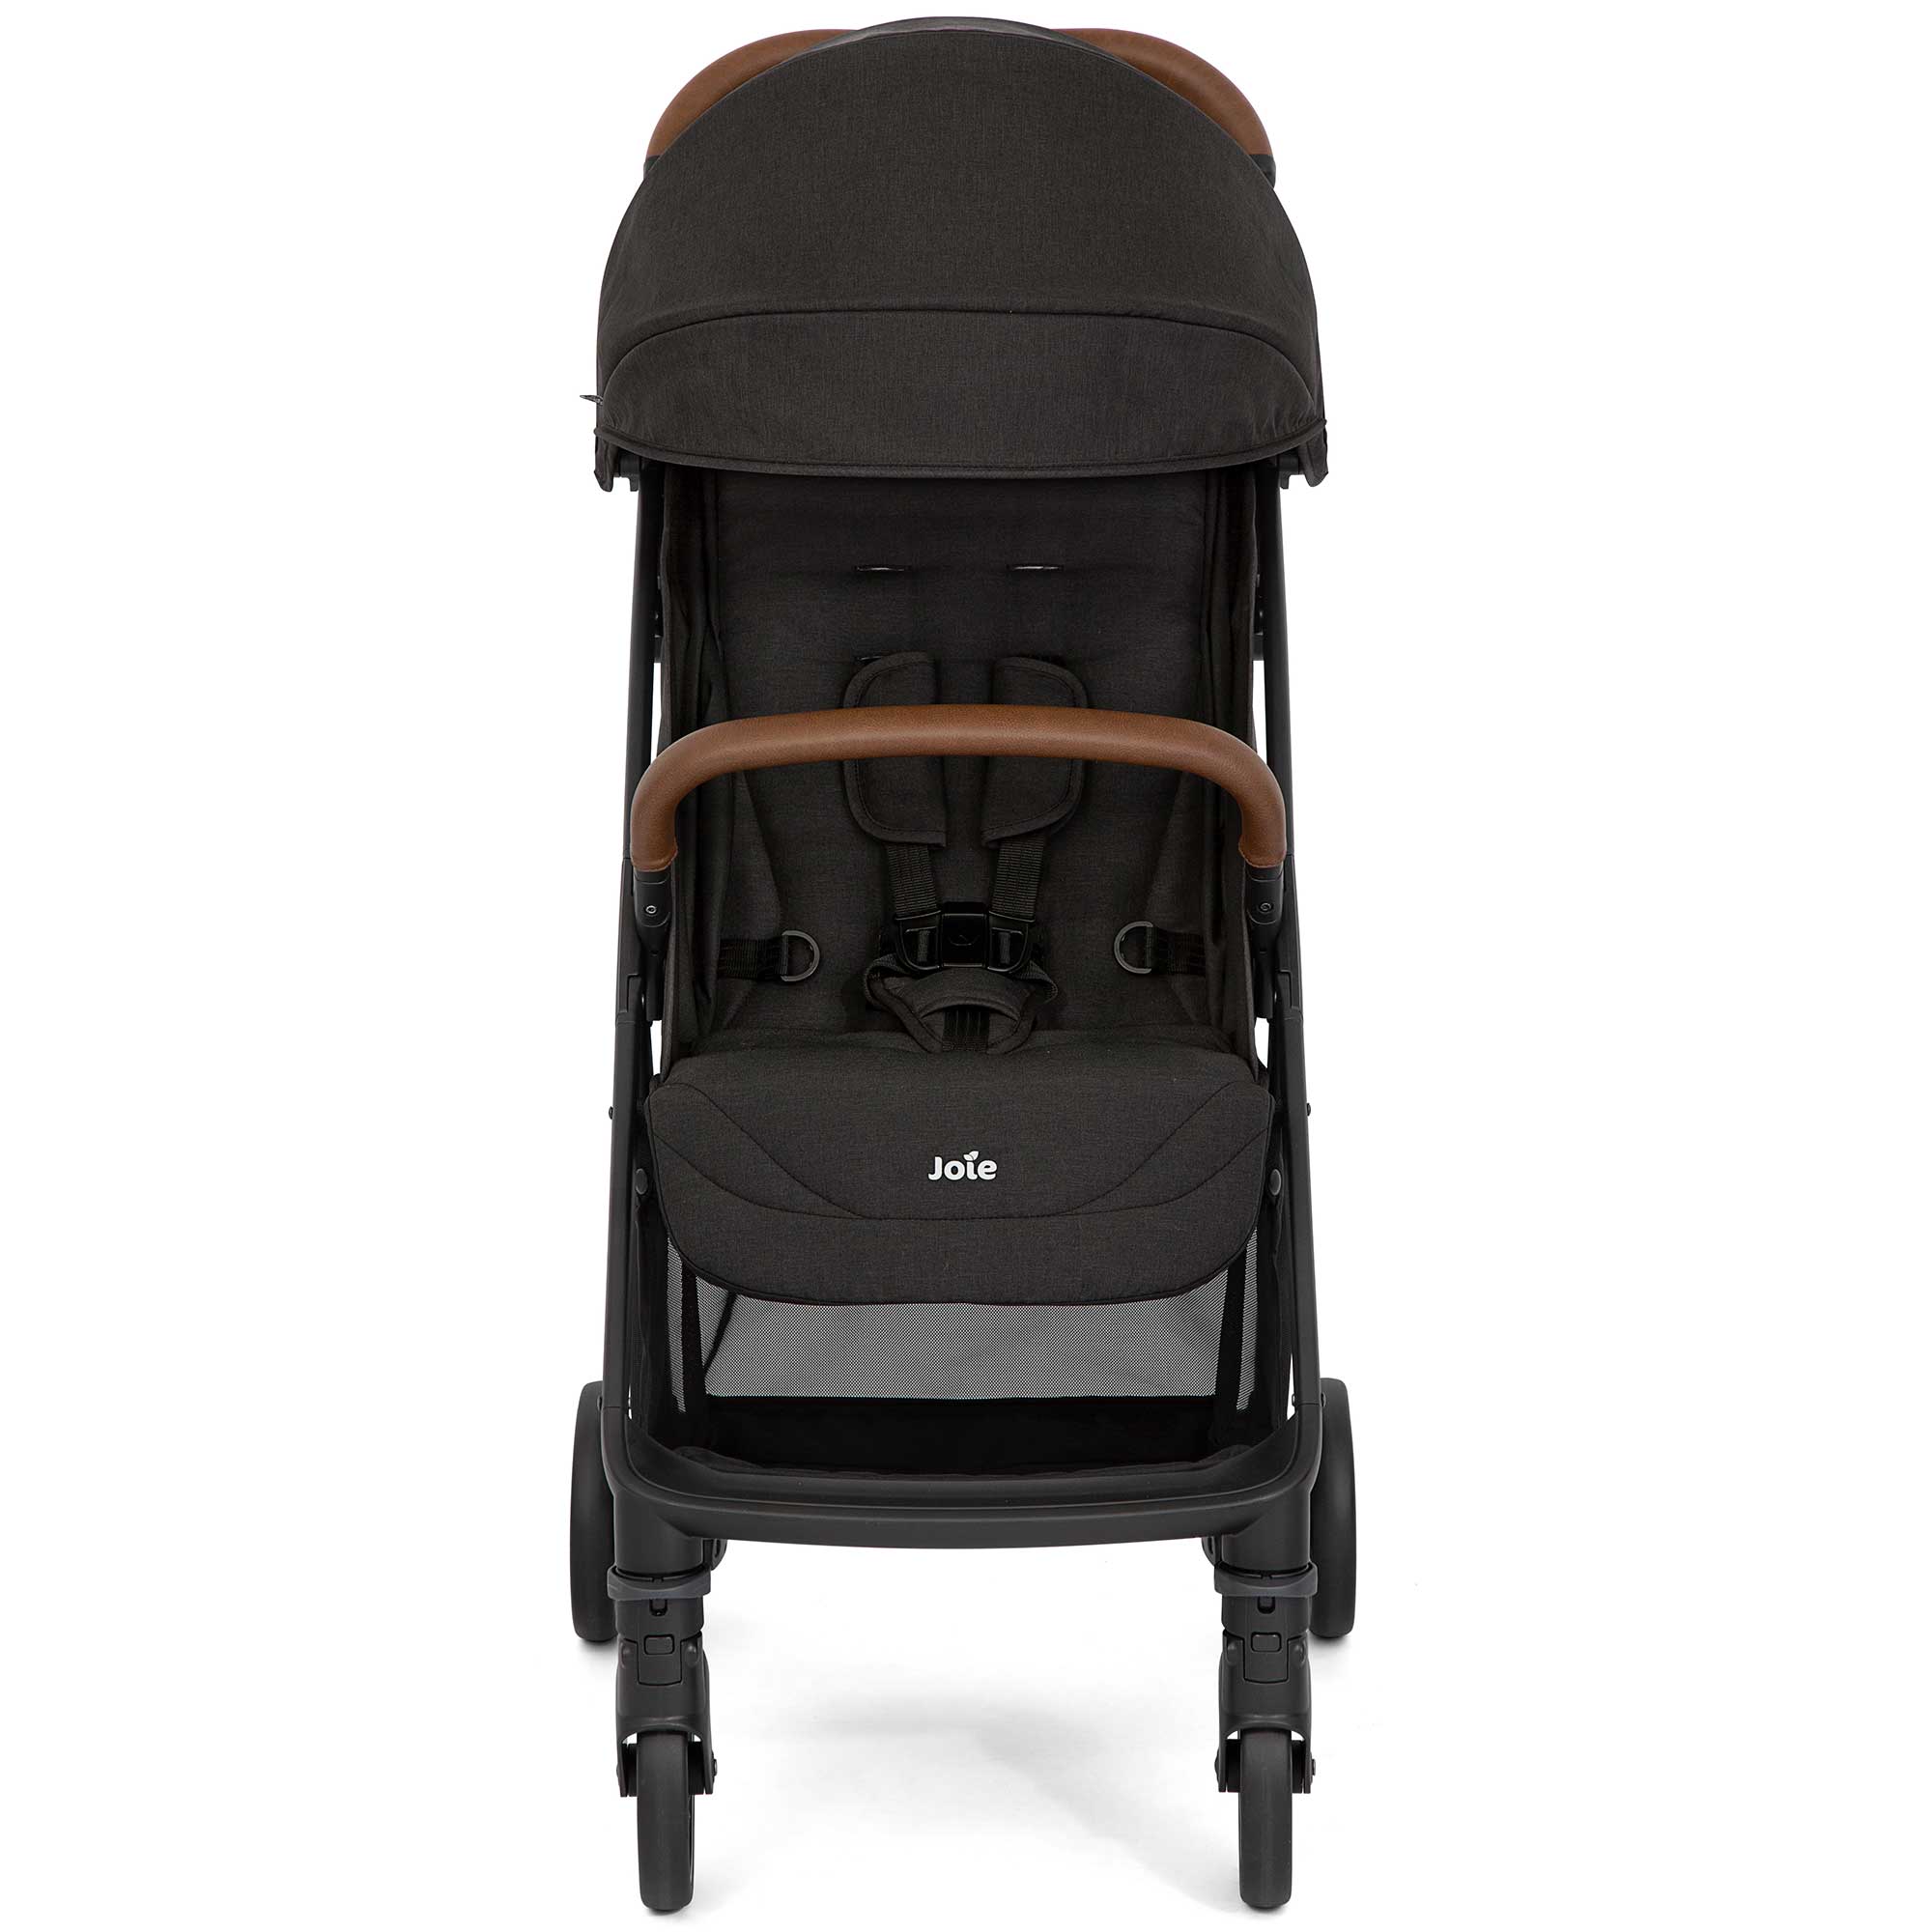 Joie Pushchairs & Buggies Joie Pact Pro Travel Stroller - Shale S2308AASHA000